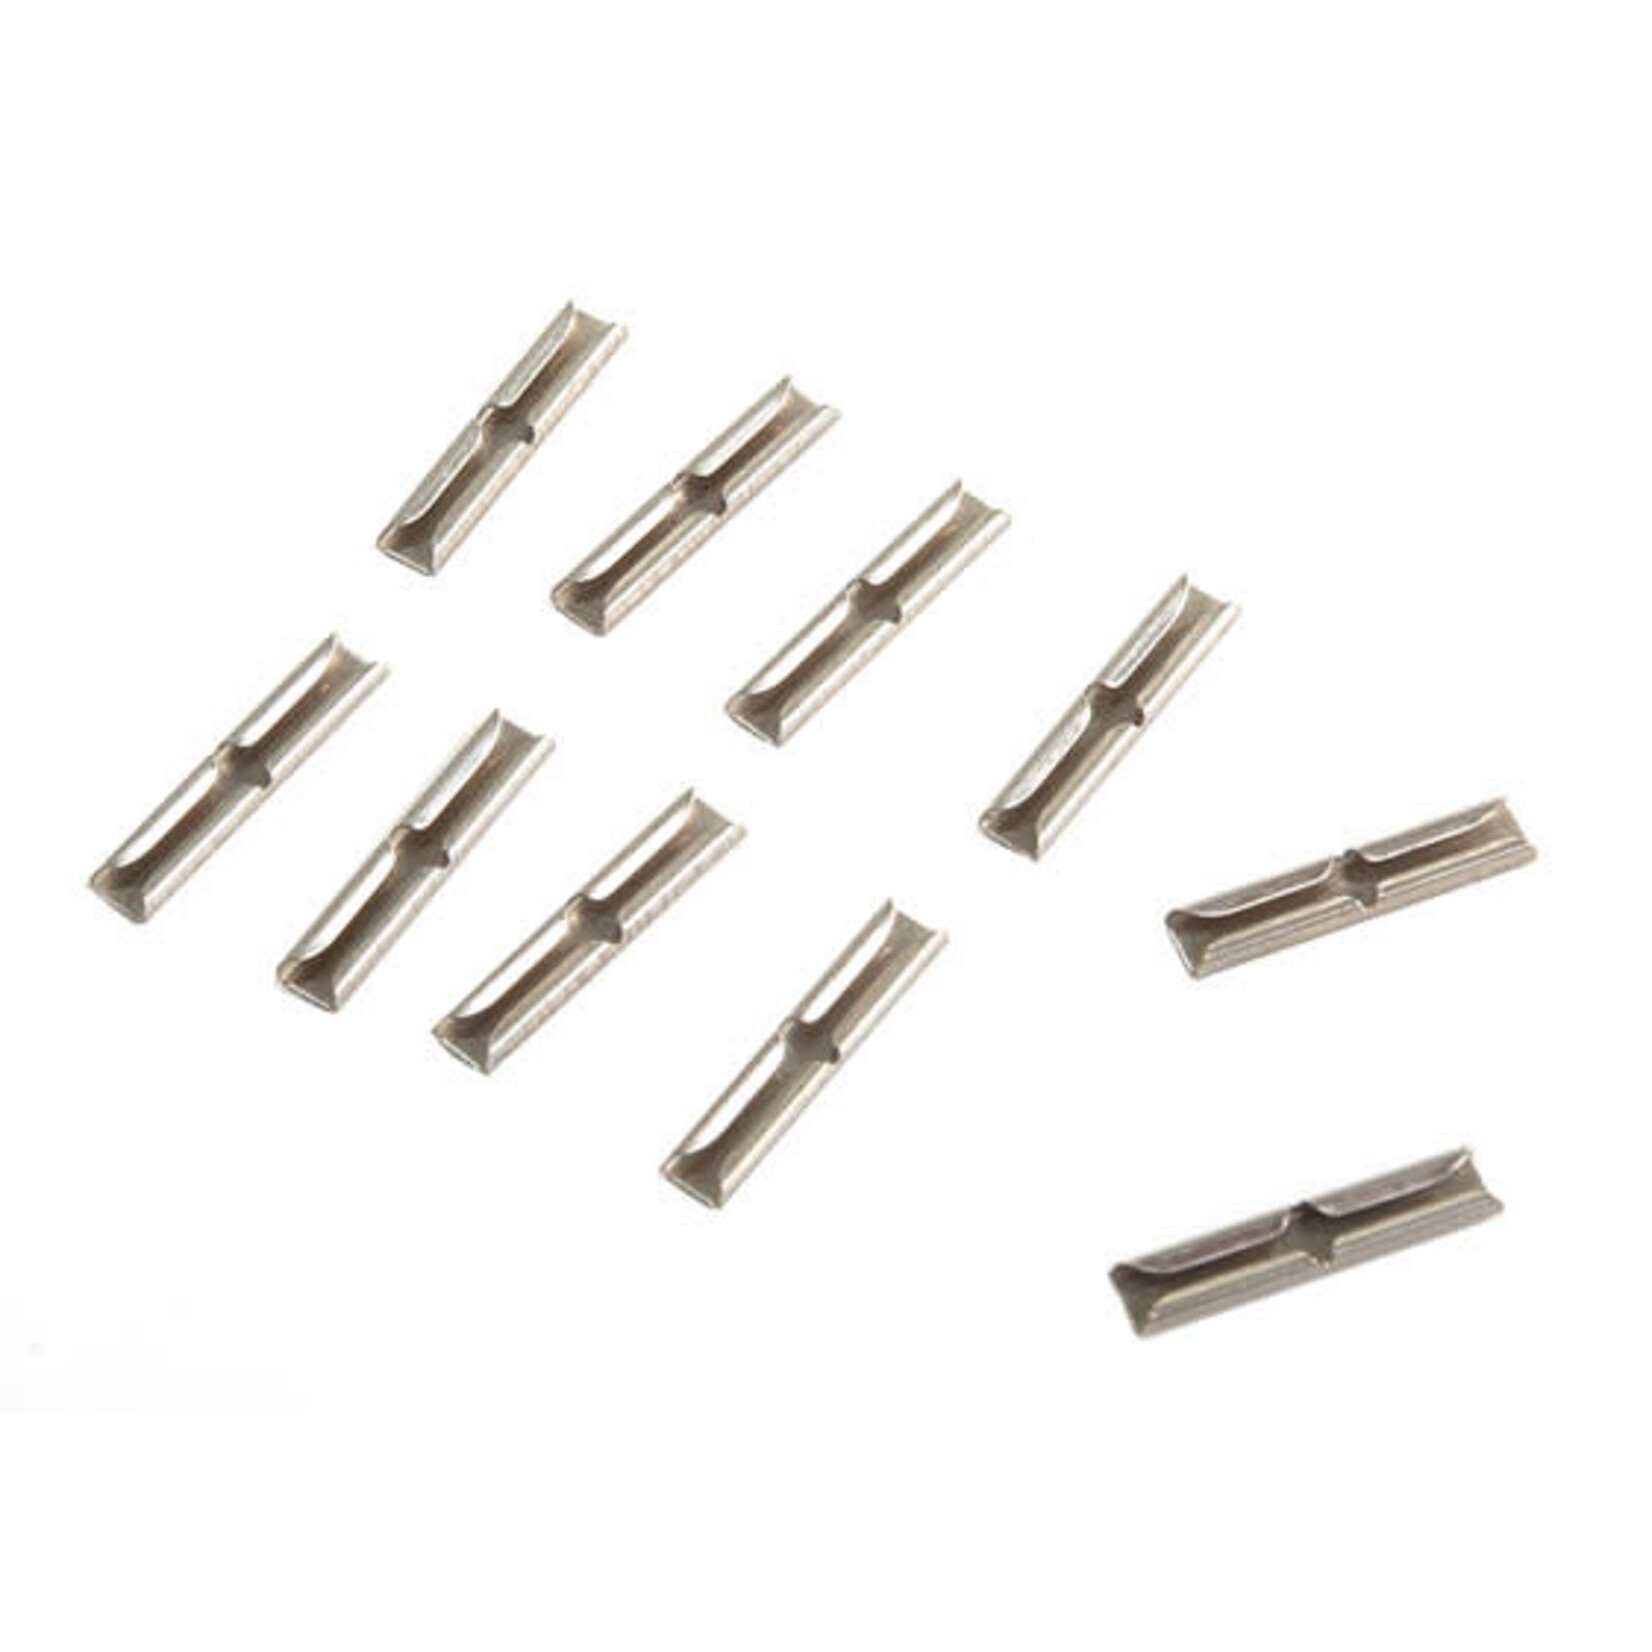 Walthers CODE 83 OR 100 NICKEL SILVER RAIL JOINERS 48 HO